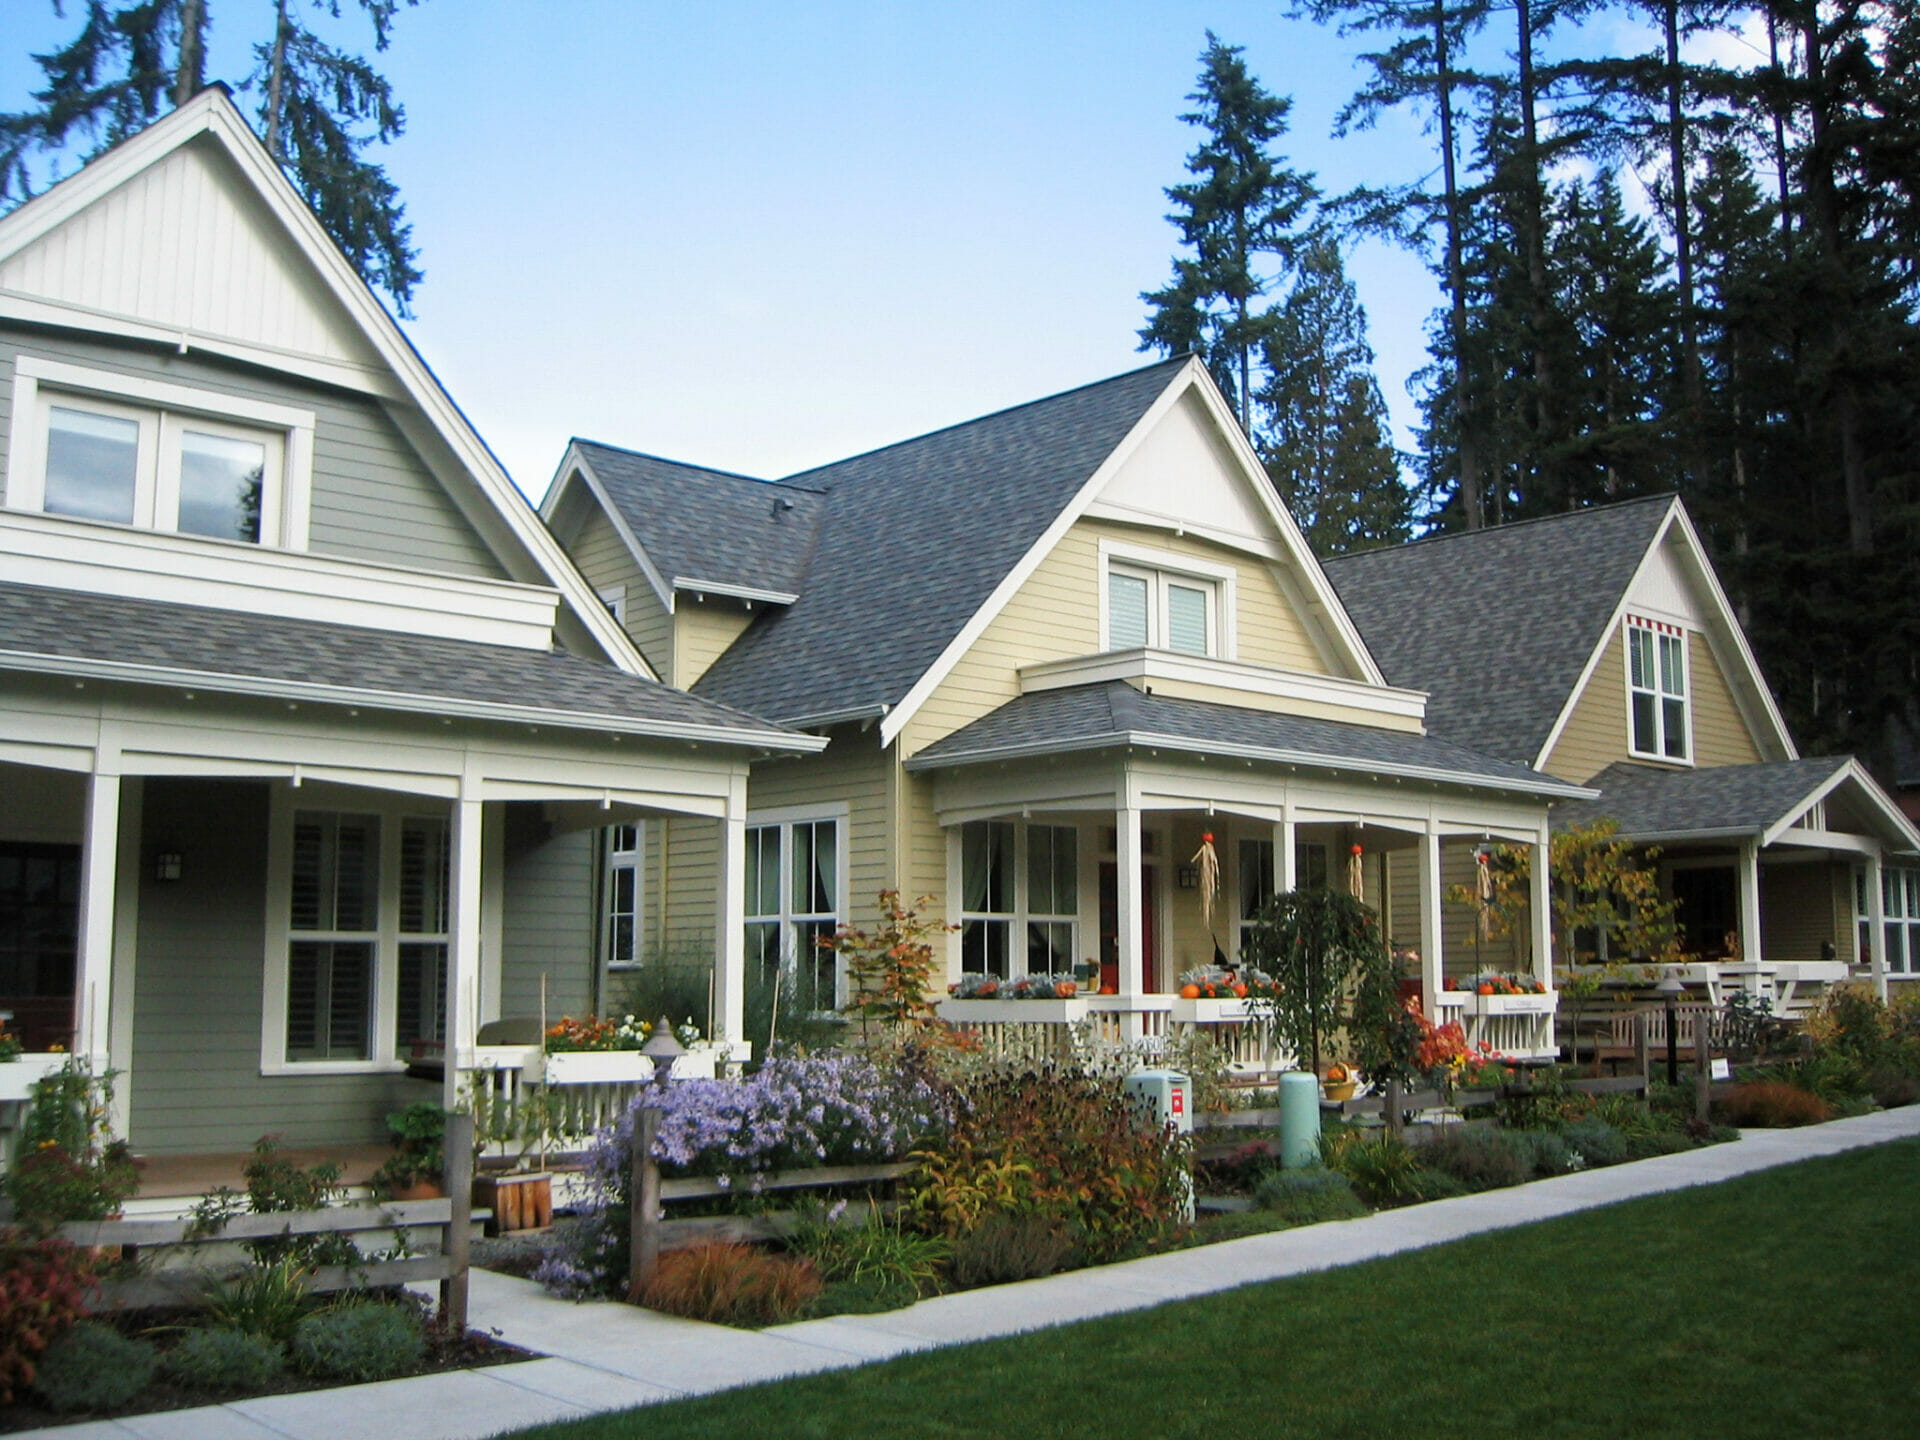 How Washington’s Middle Housing Legislation Applies in Your Community